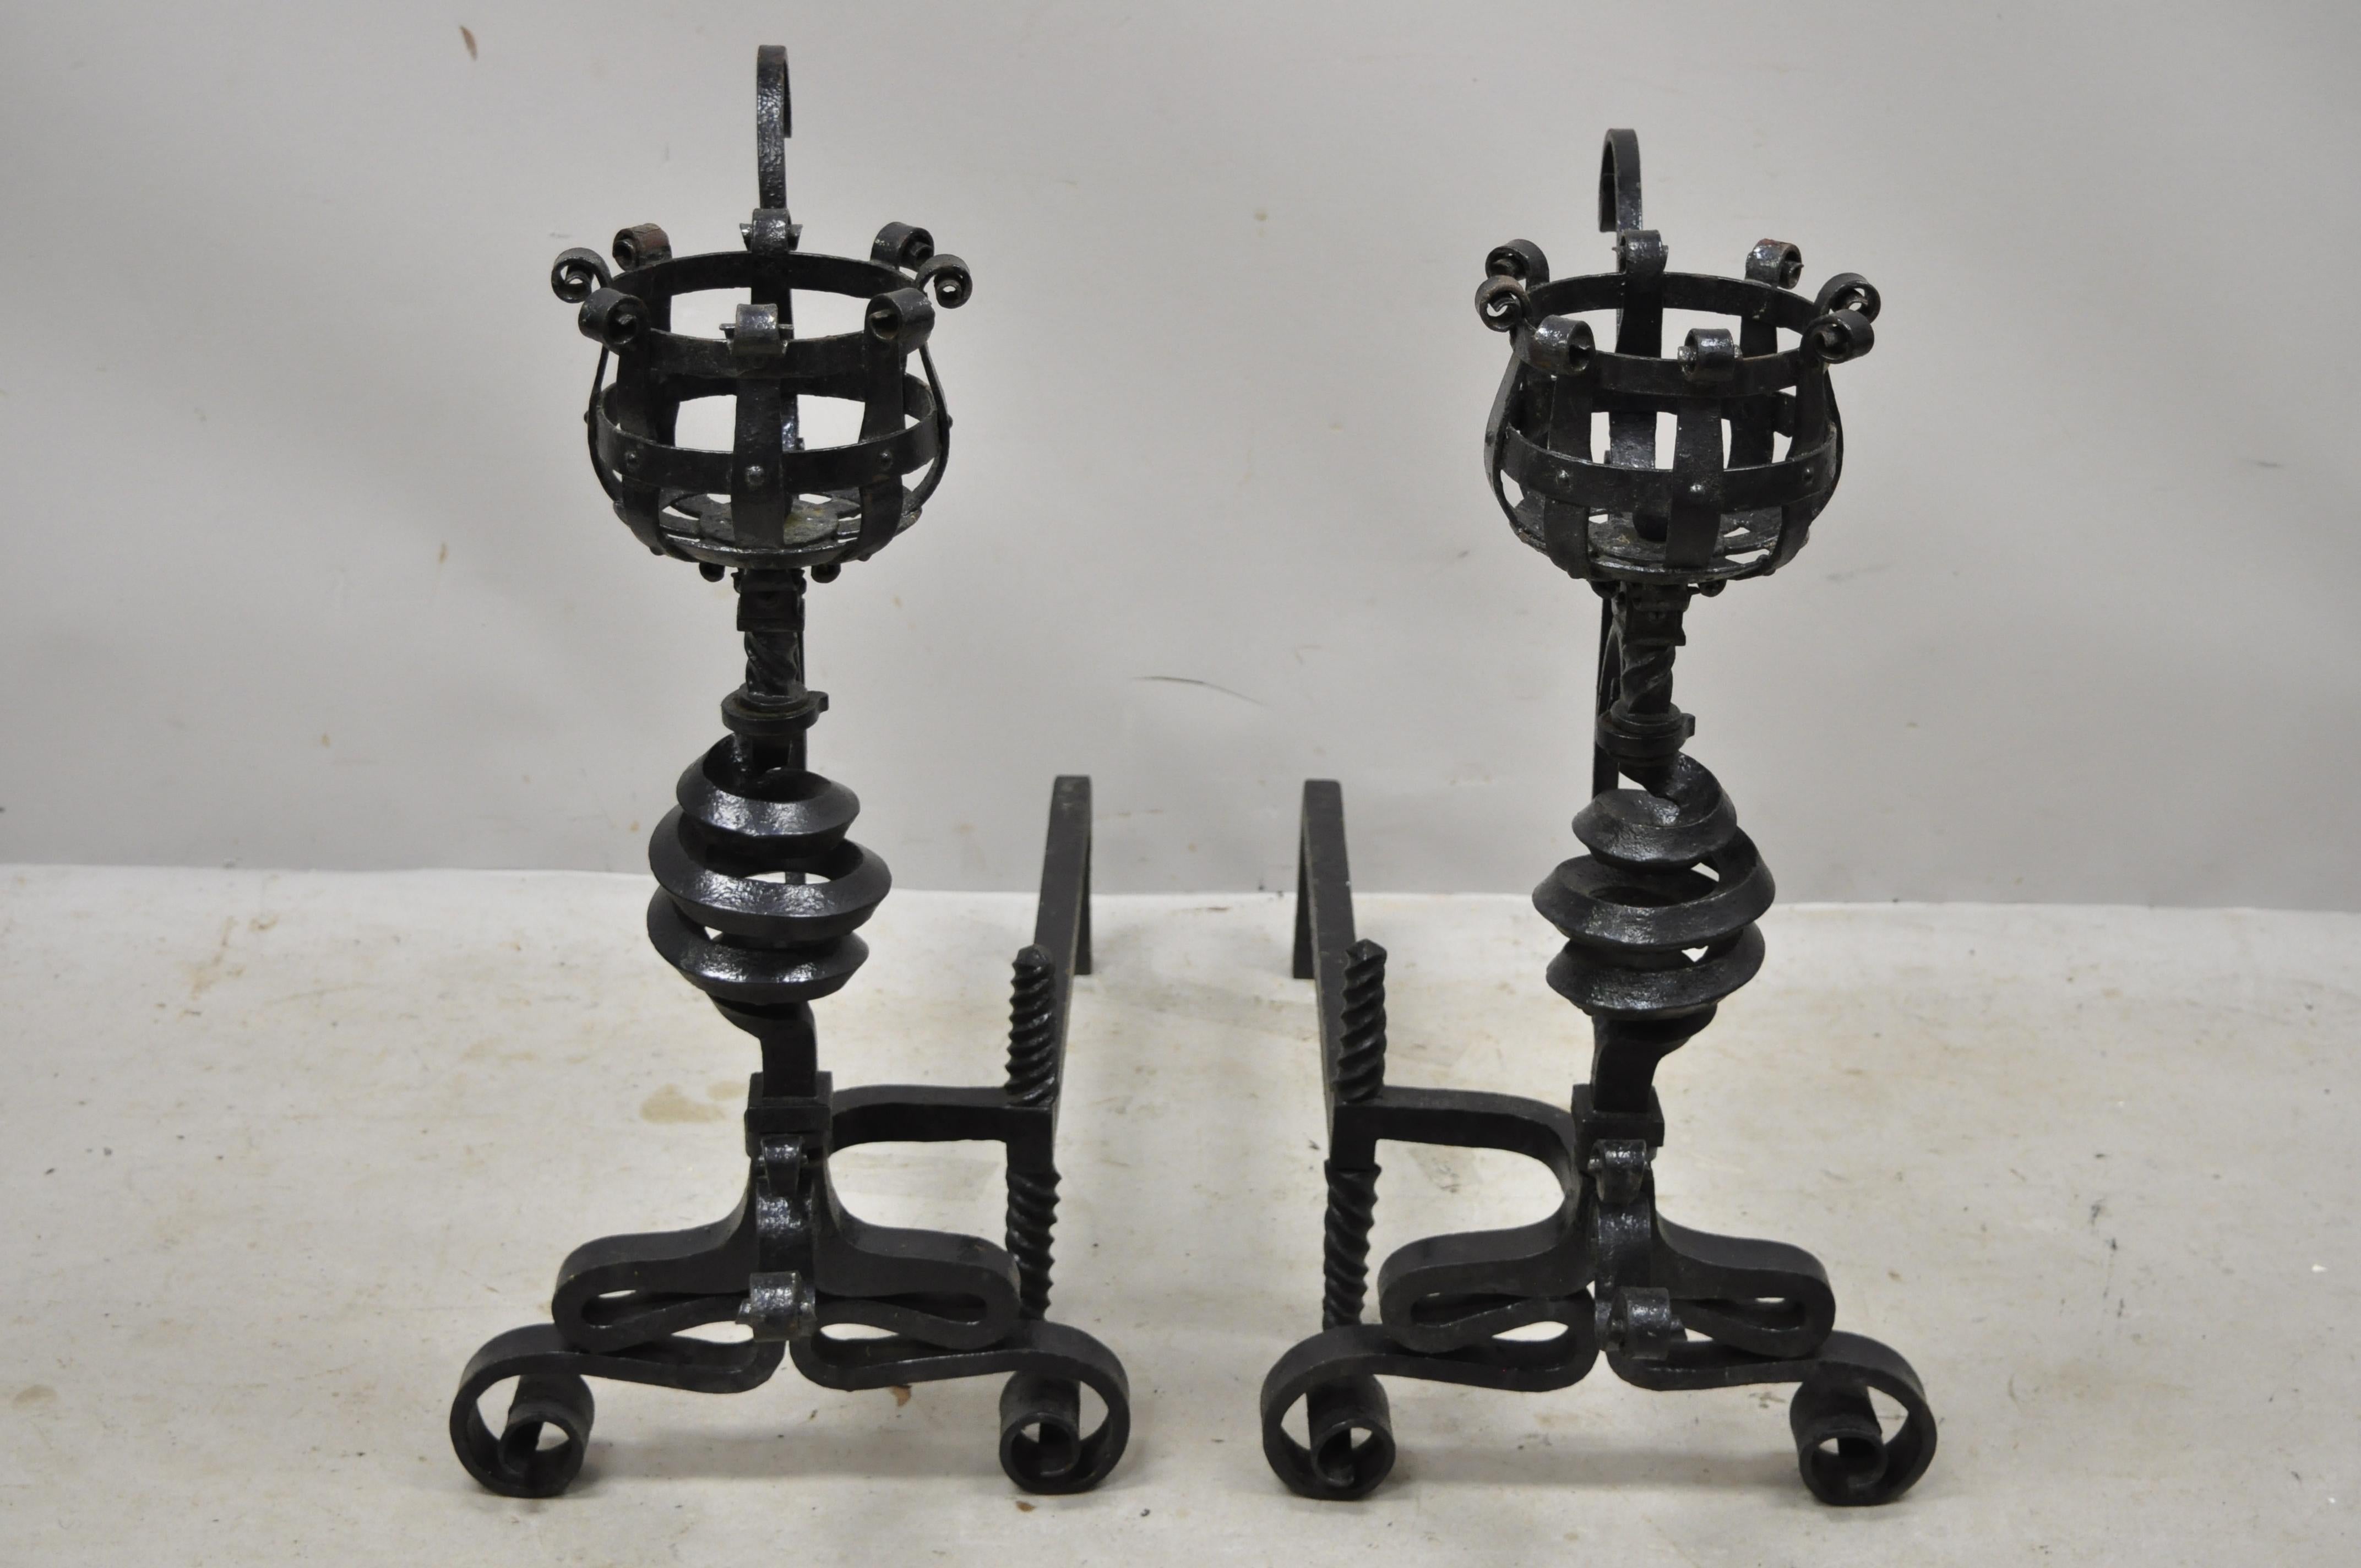 Antique Arts & Crafts Gothic cast iron spiral scrollwork fireplace andirons, a pair. Item features swing out arm/pot holders, ornate scrolling frame, spiral form body, cast iron construction, very nice antique item, quality craftsmanship,
circa